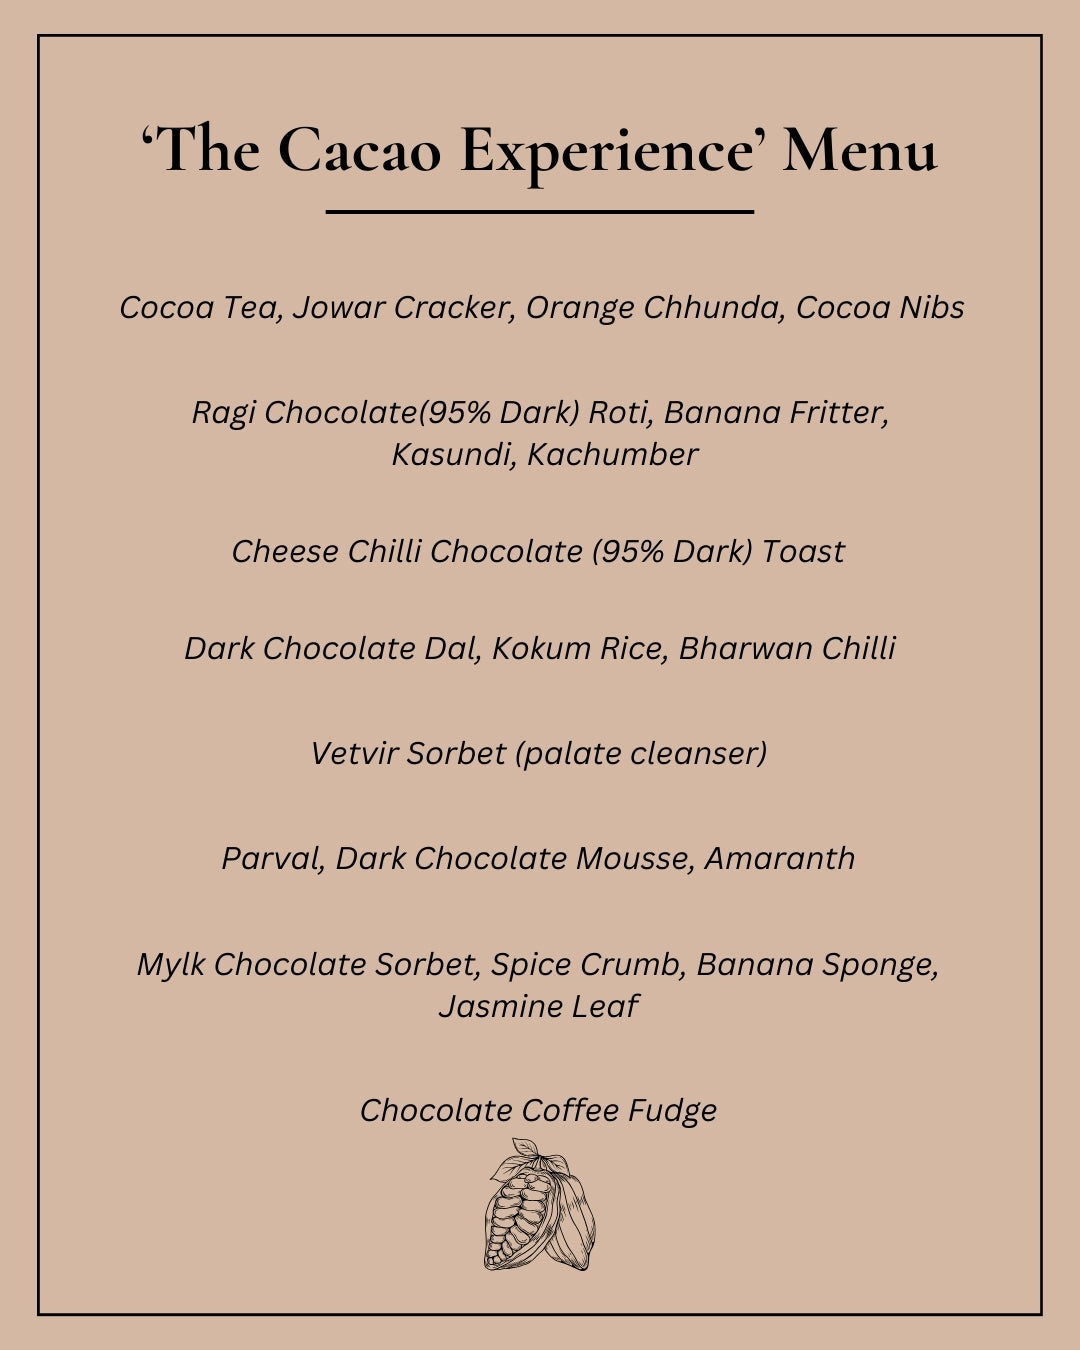 Chef's Table - The Cacao Experience (Lunch Service) - Darkins Chocolates